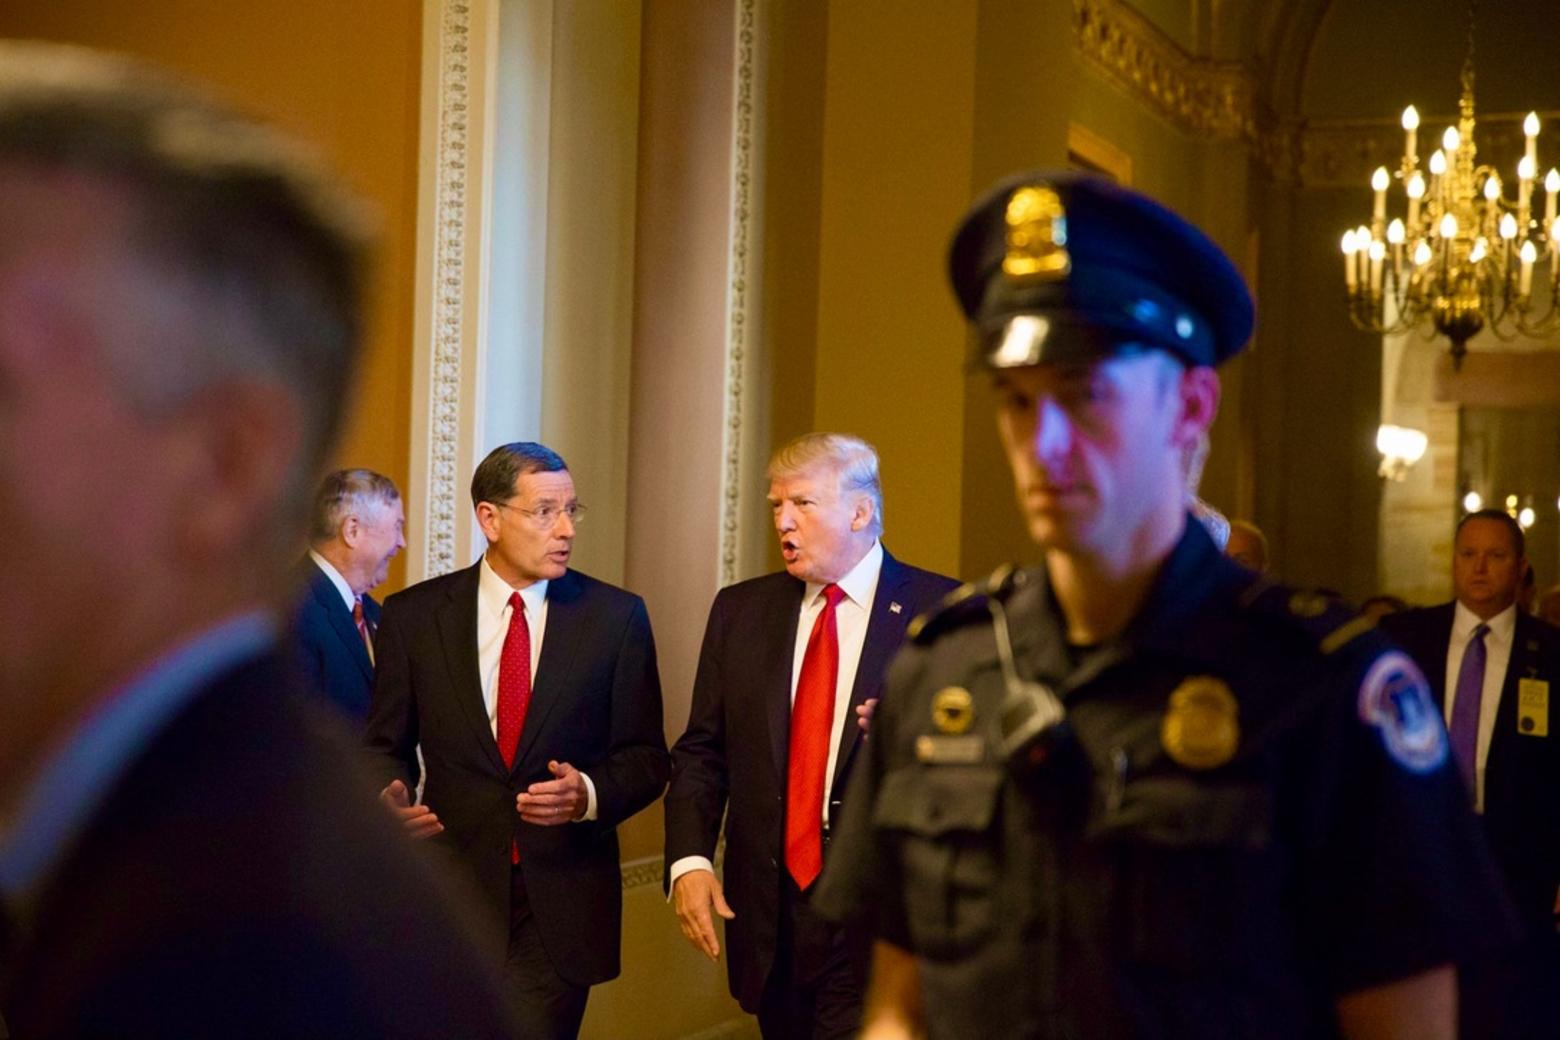 US Sen. John Barrasso of Wyoming and his friend, President Trump, take a stroll together on Capitol Hill.  Photo from Barrasso Senate Facebook page